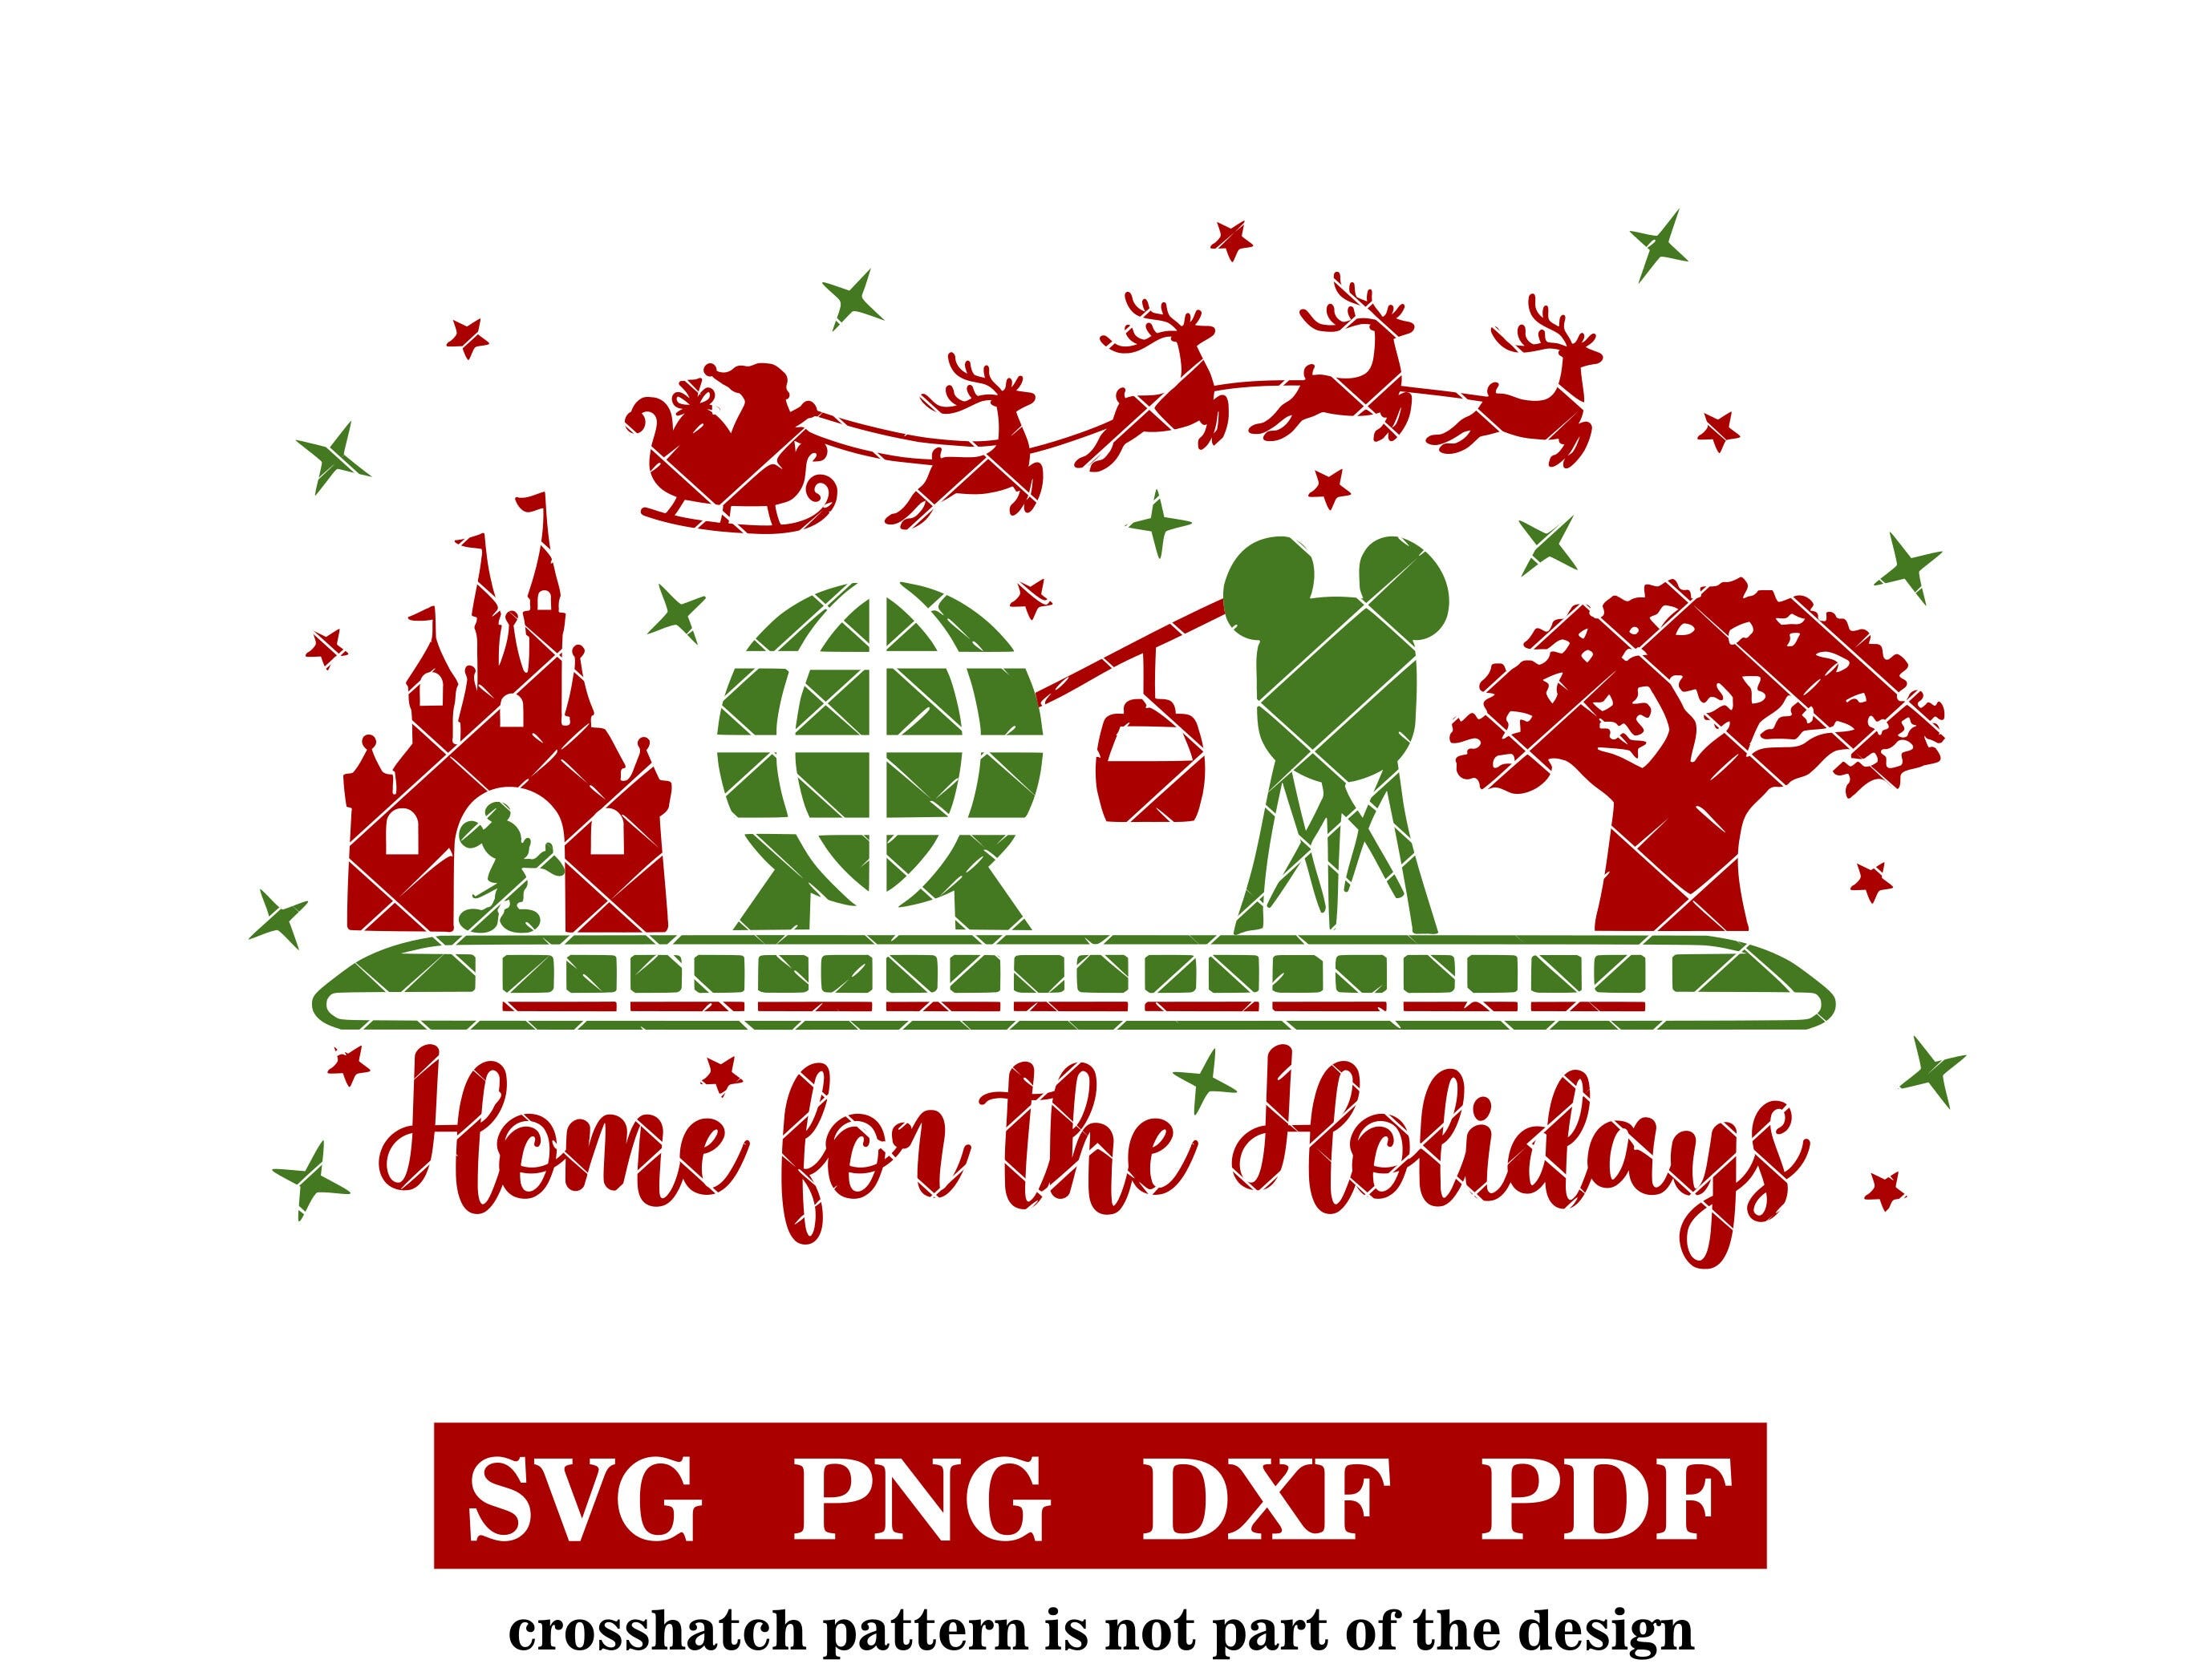 Home for the Holidays, DIY tshirt design, theme park vacation, svg-png-dxf-pdf